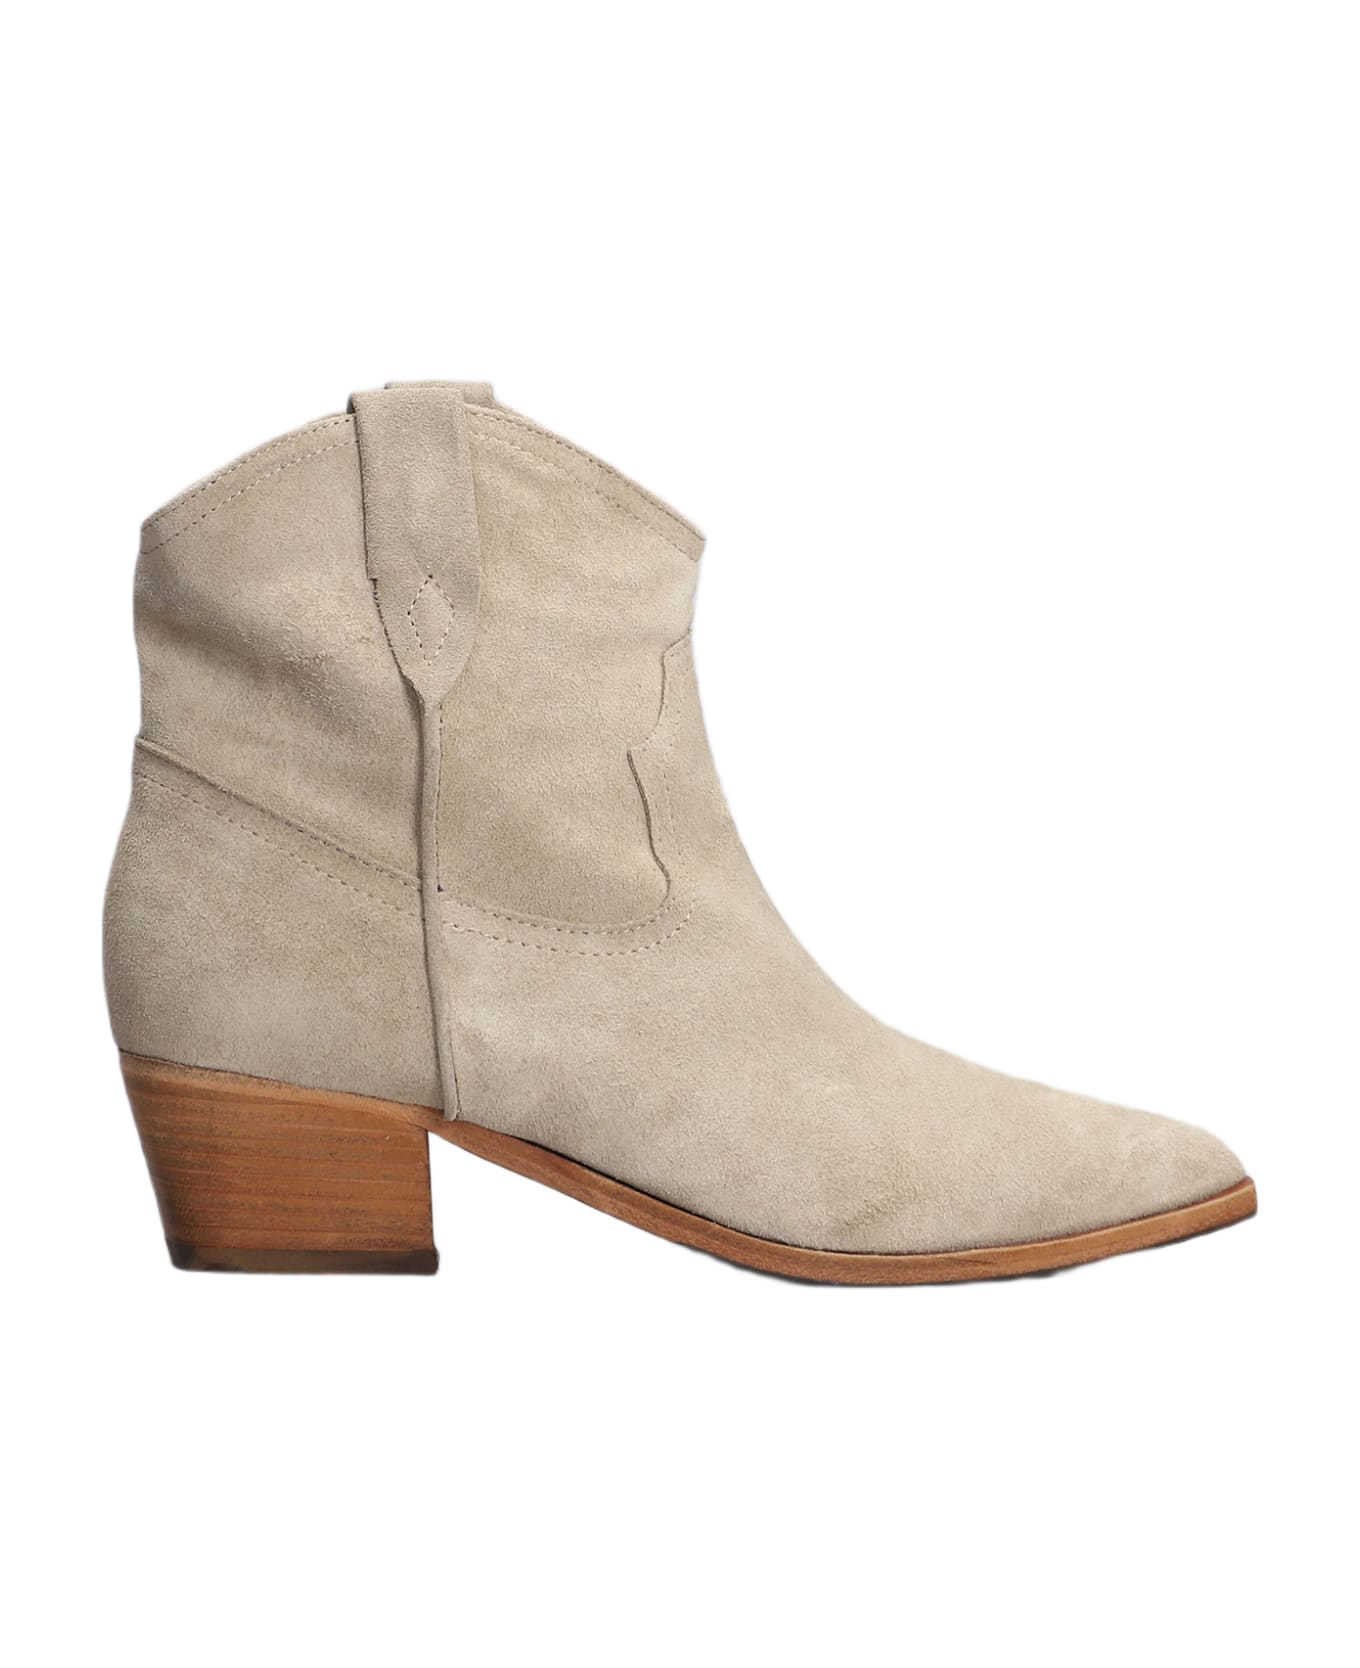 Julie Dee Texan Ankle Boots In collaboration Suede - collaboration